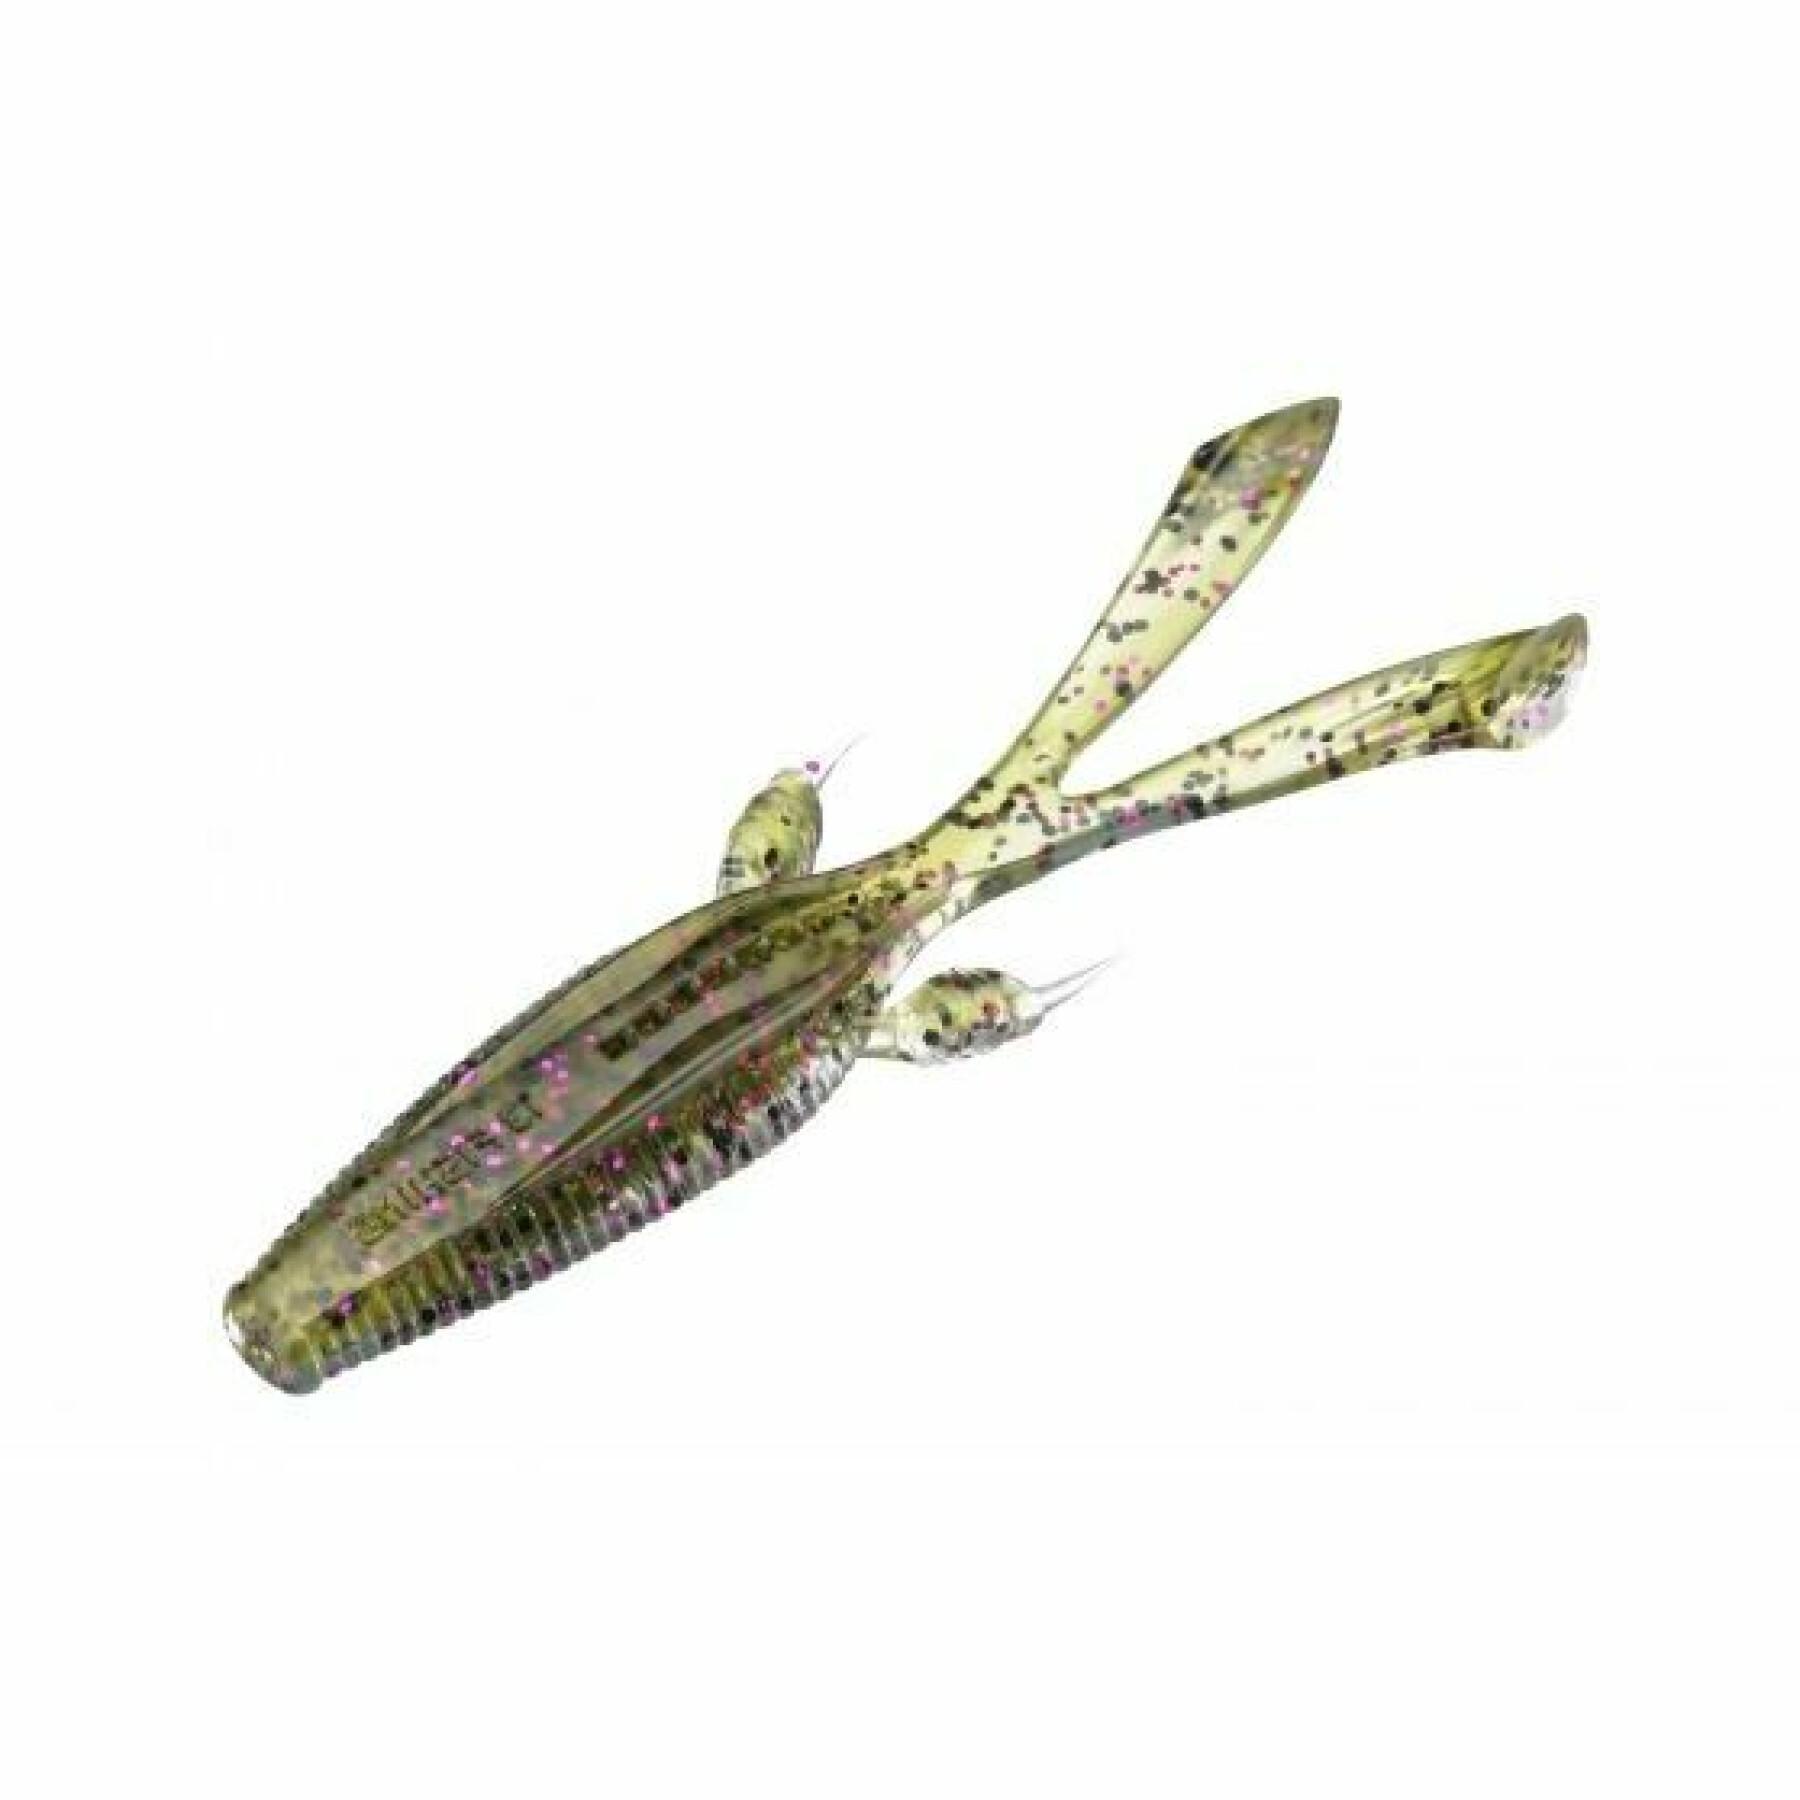 Soft lures 13 Fishing Invader 10,8cm x6